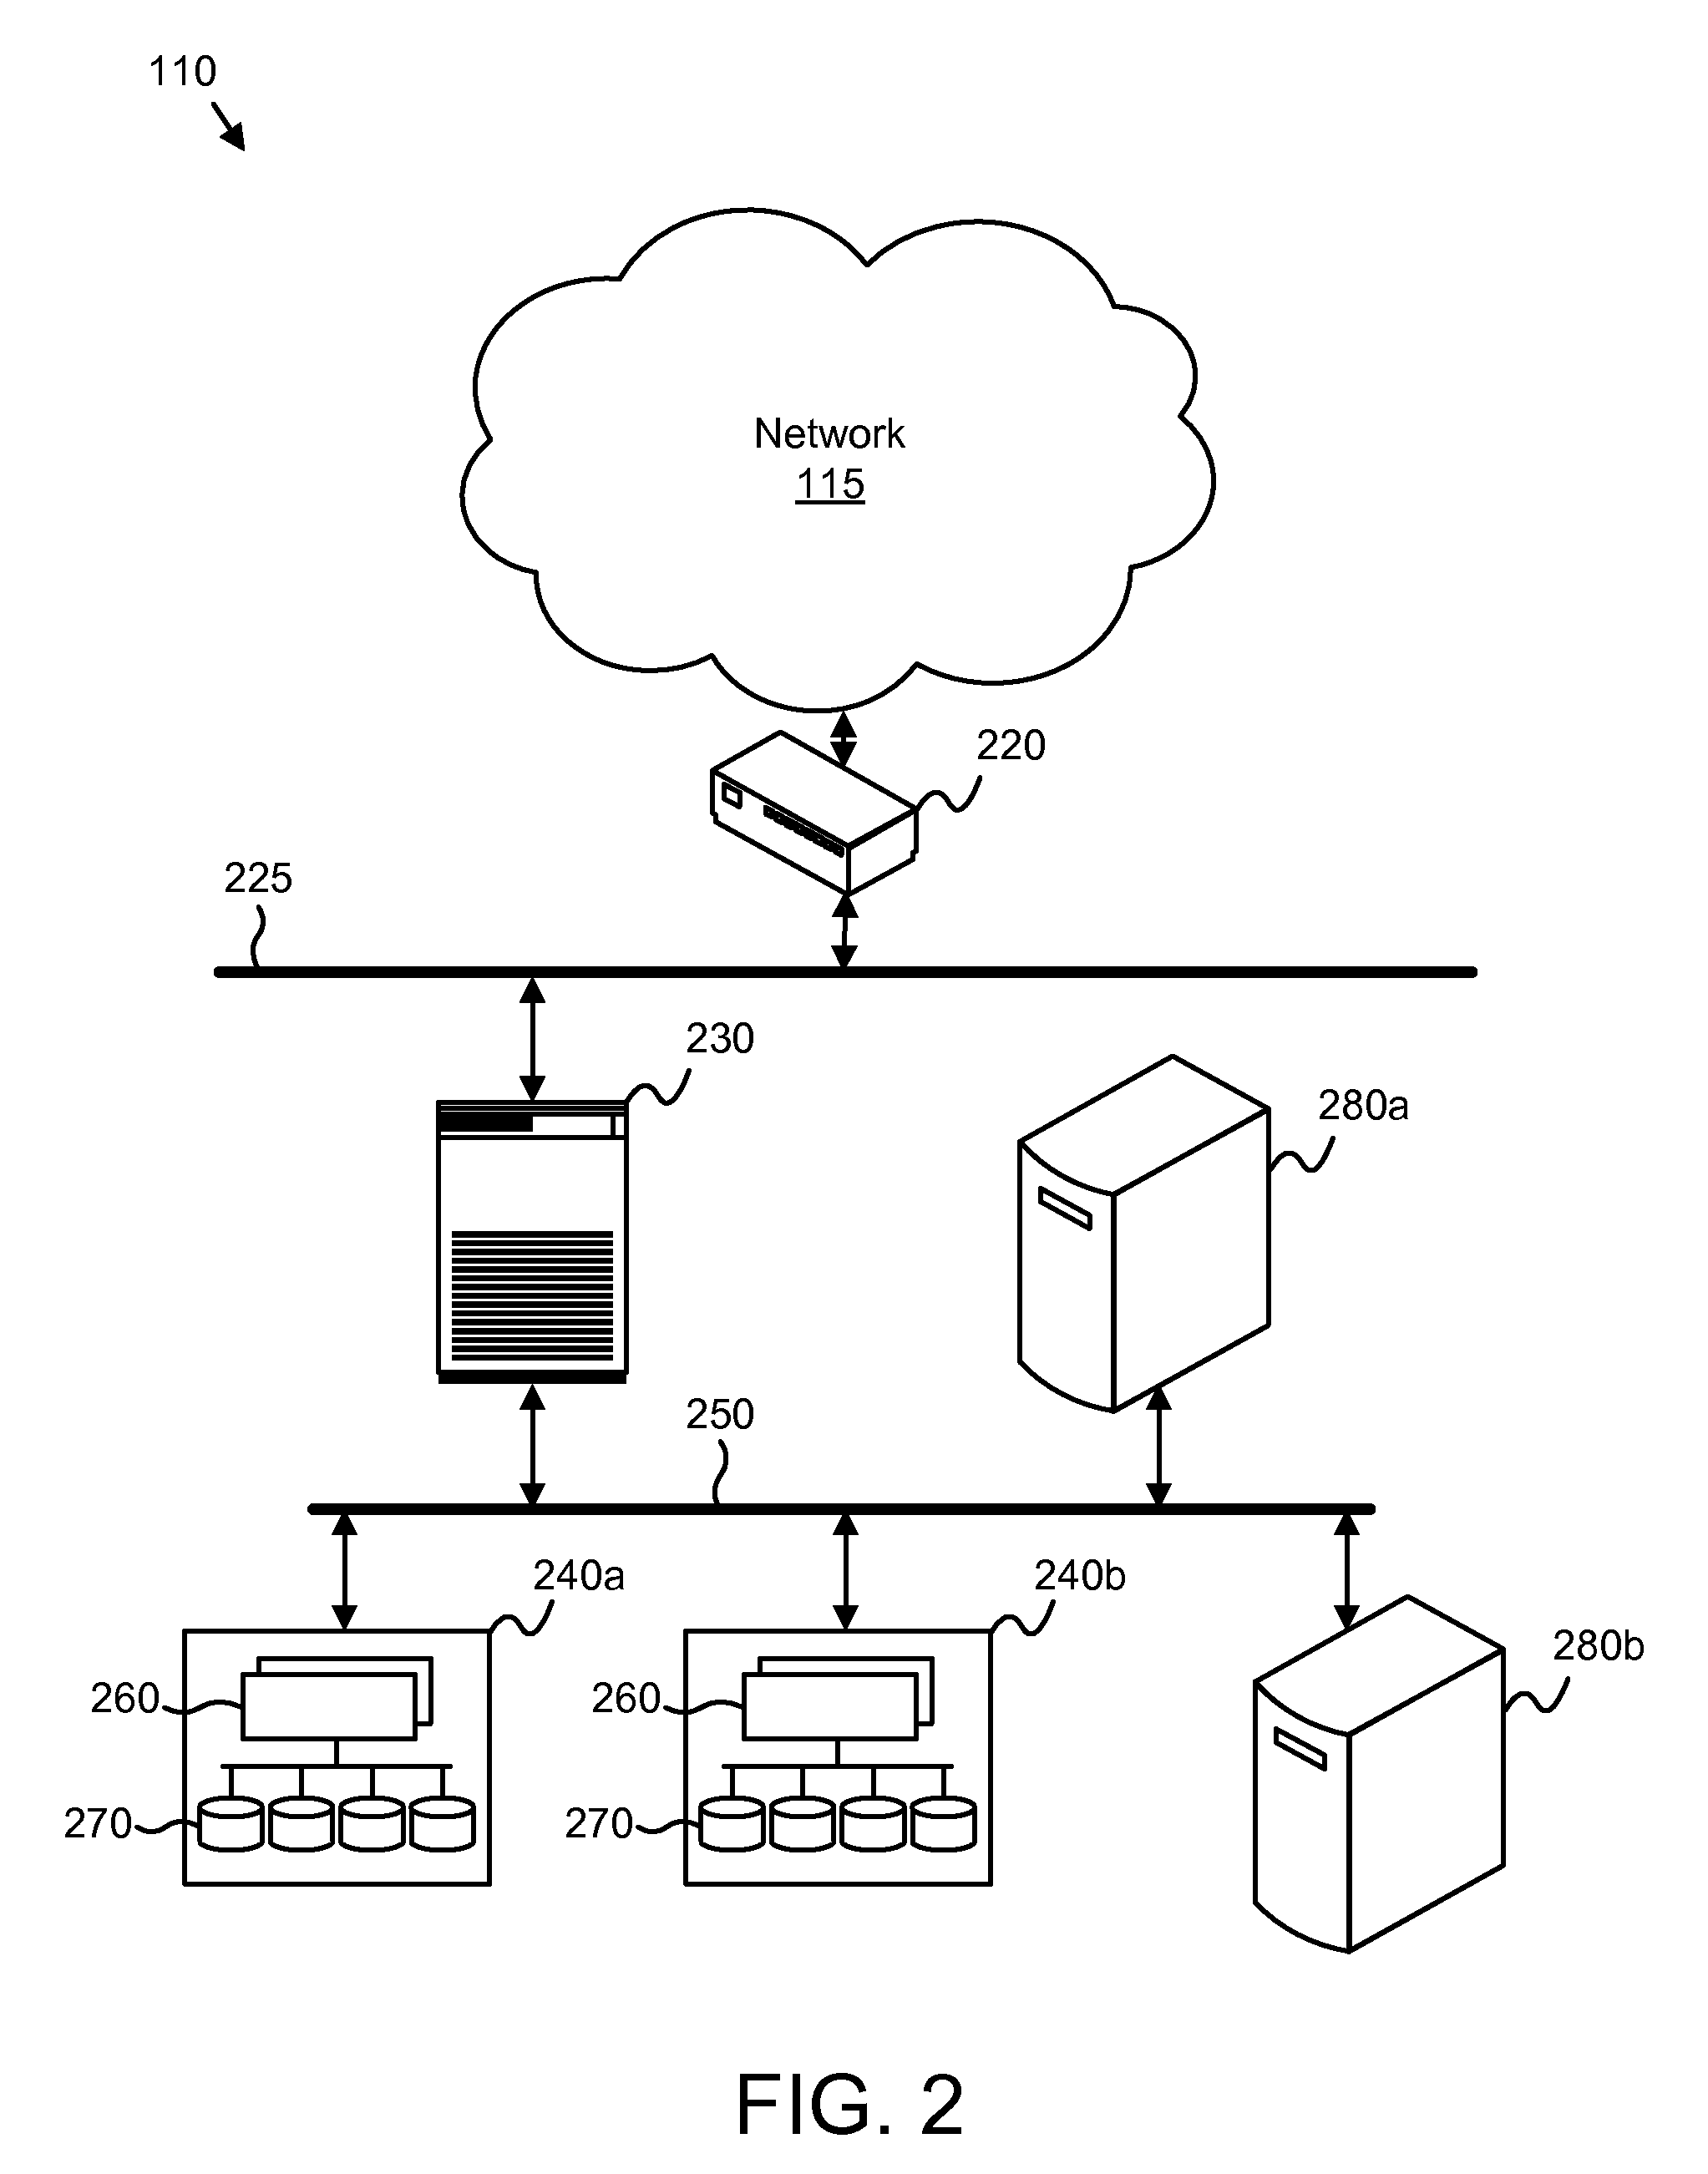 Apparatus, system, and method for analyzing a file system